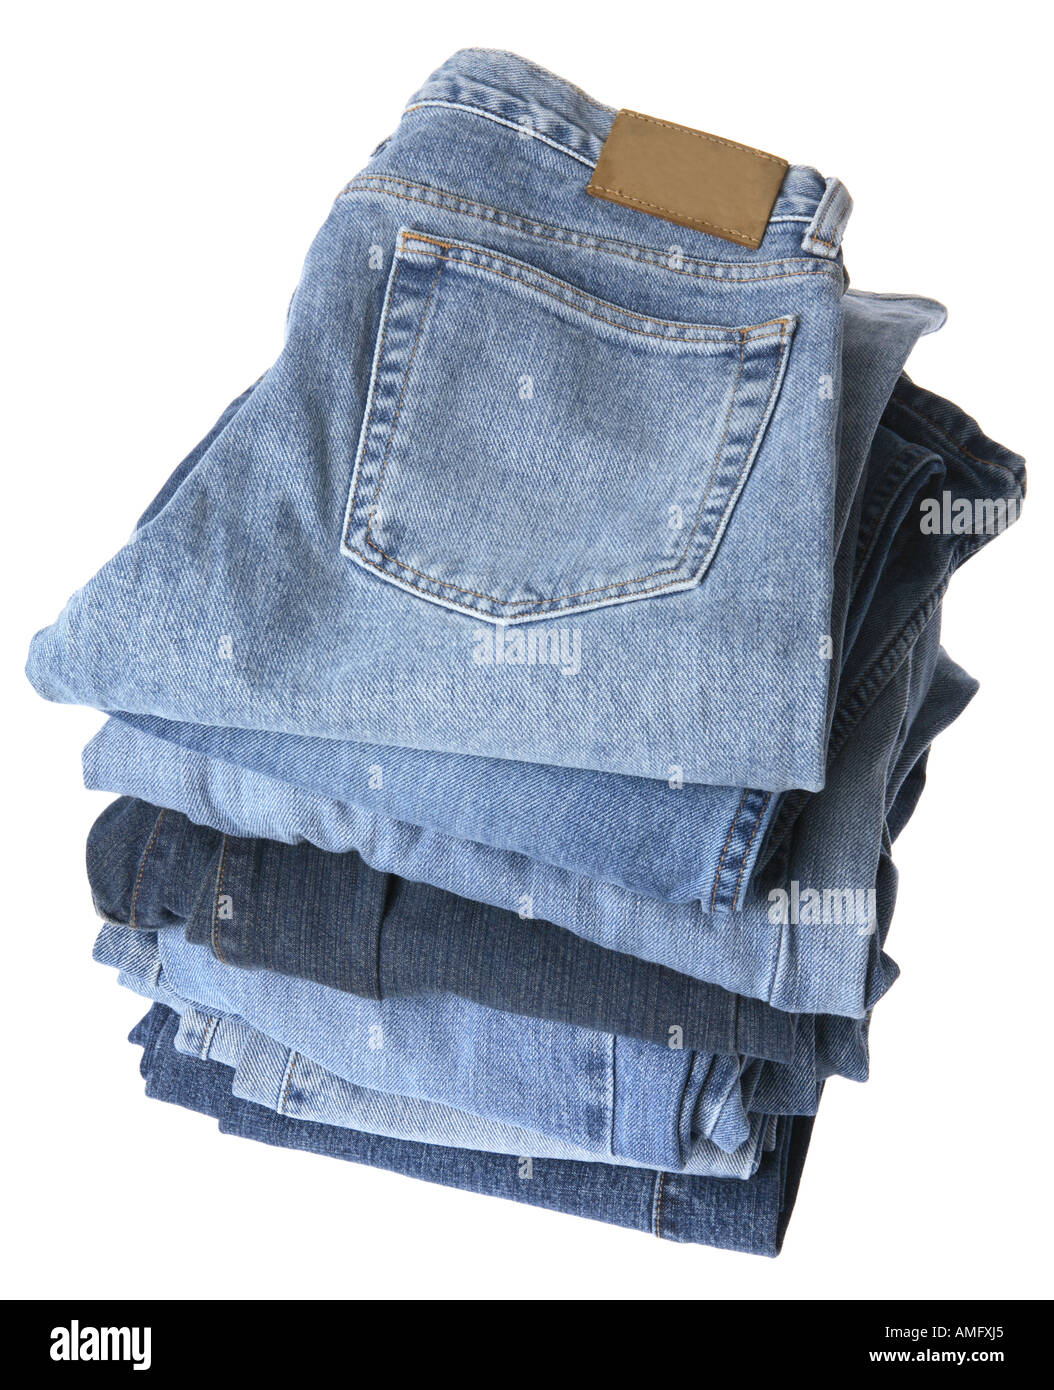 Stack of Blue Jeans Stock Photo